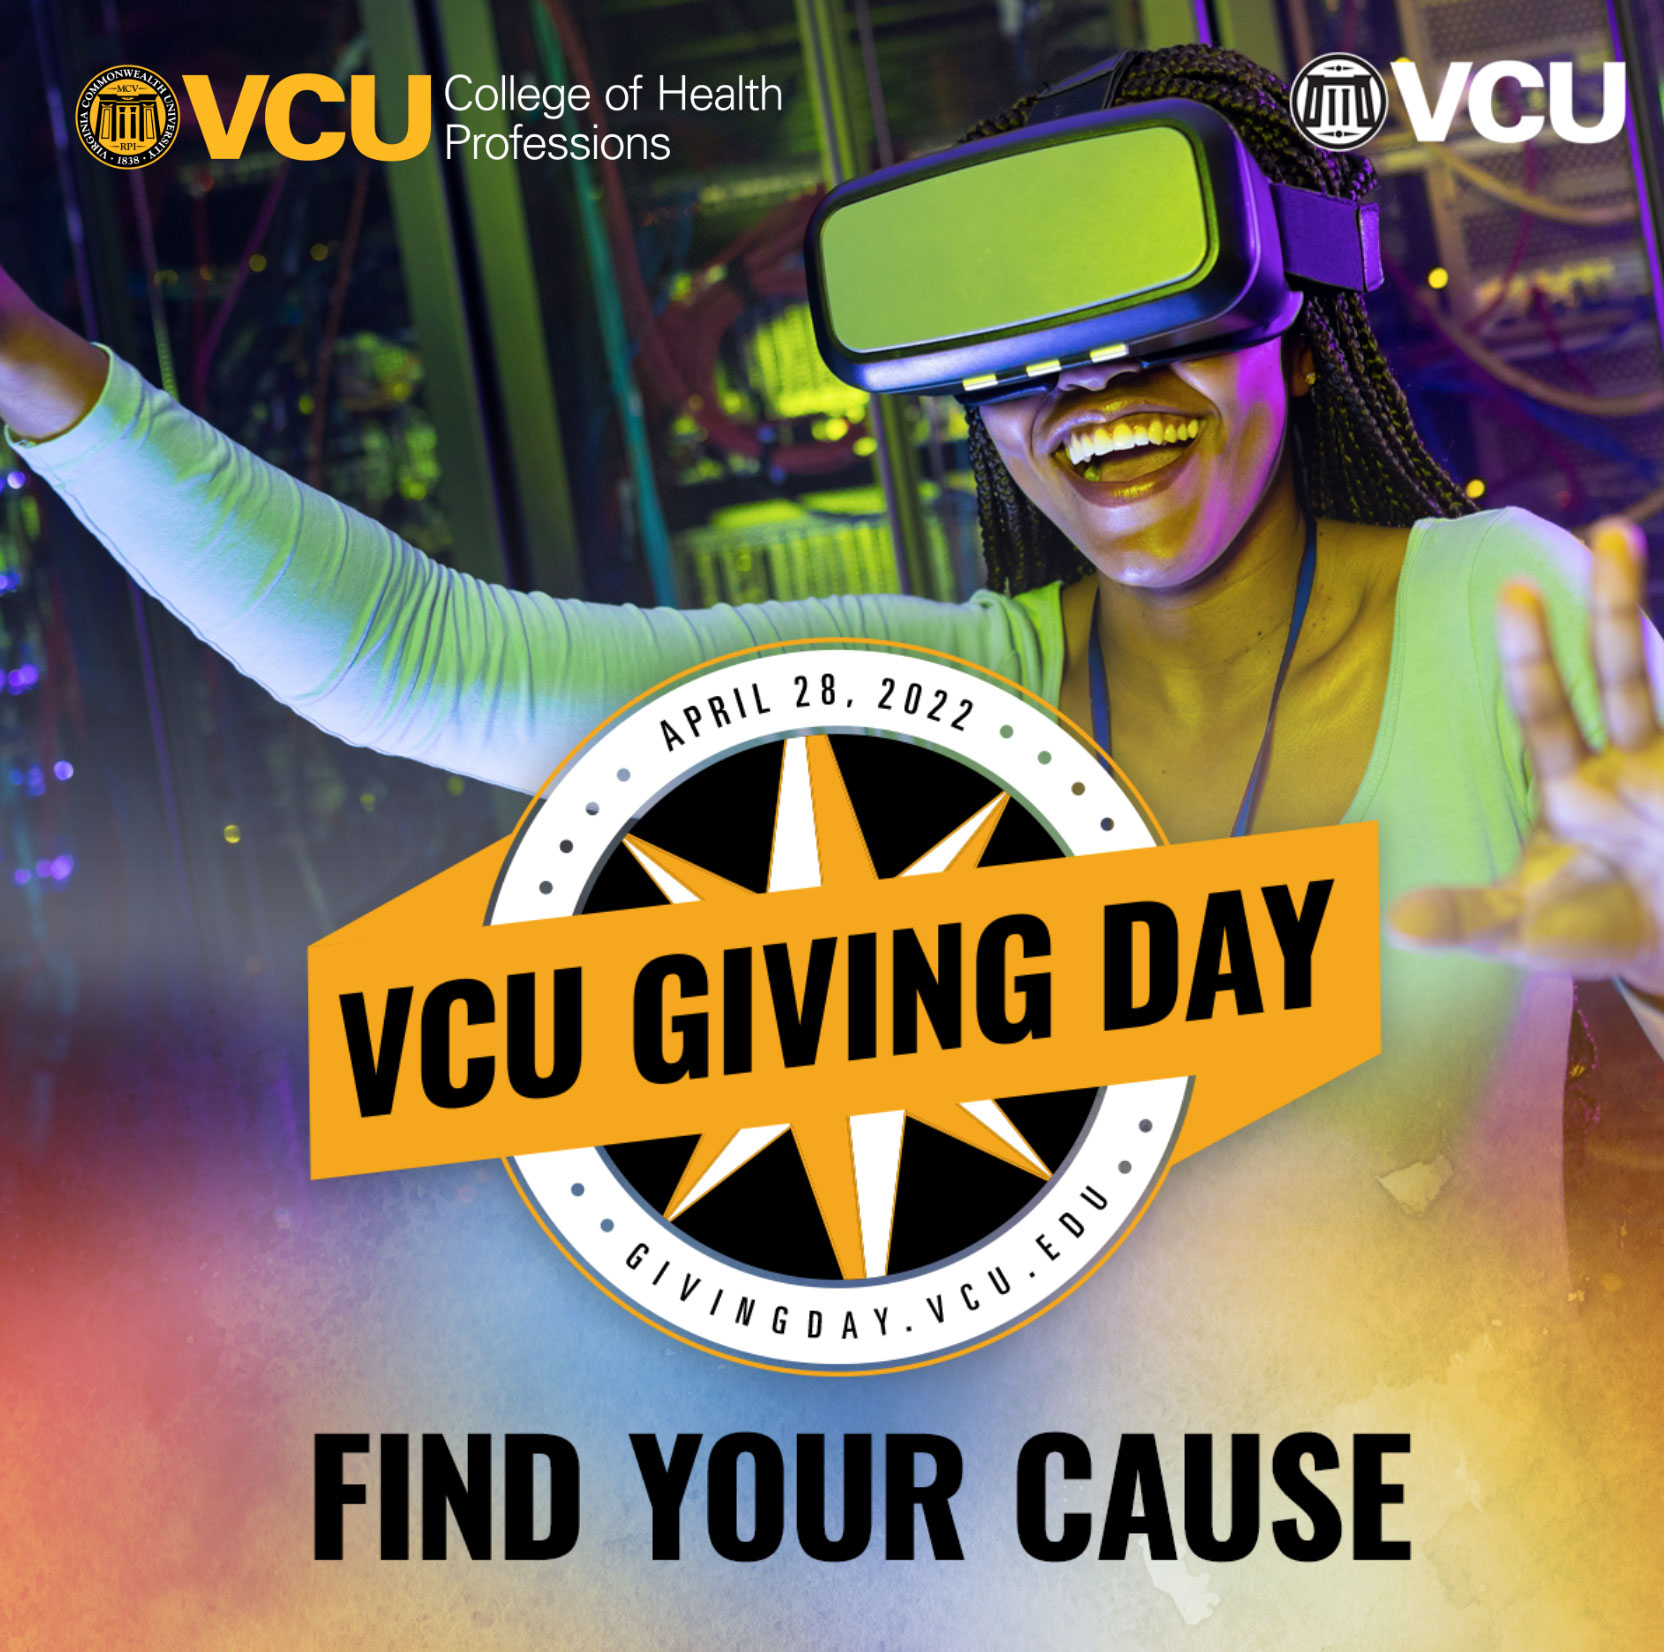 VCU Giving Day Find your Cause givingday.vcu.edu